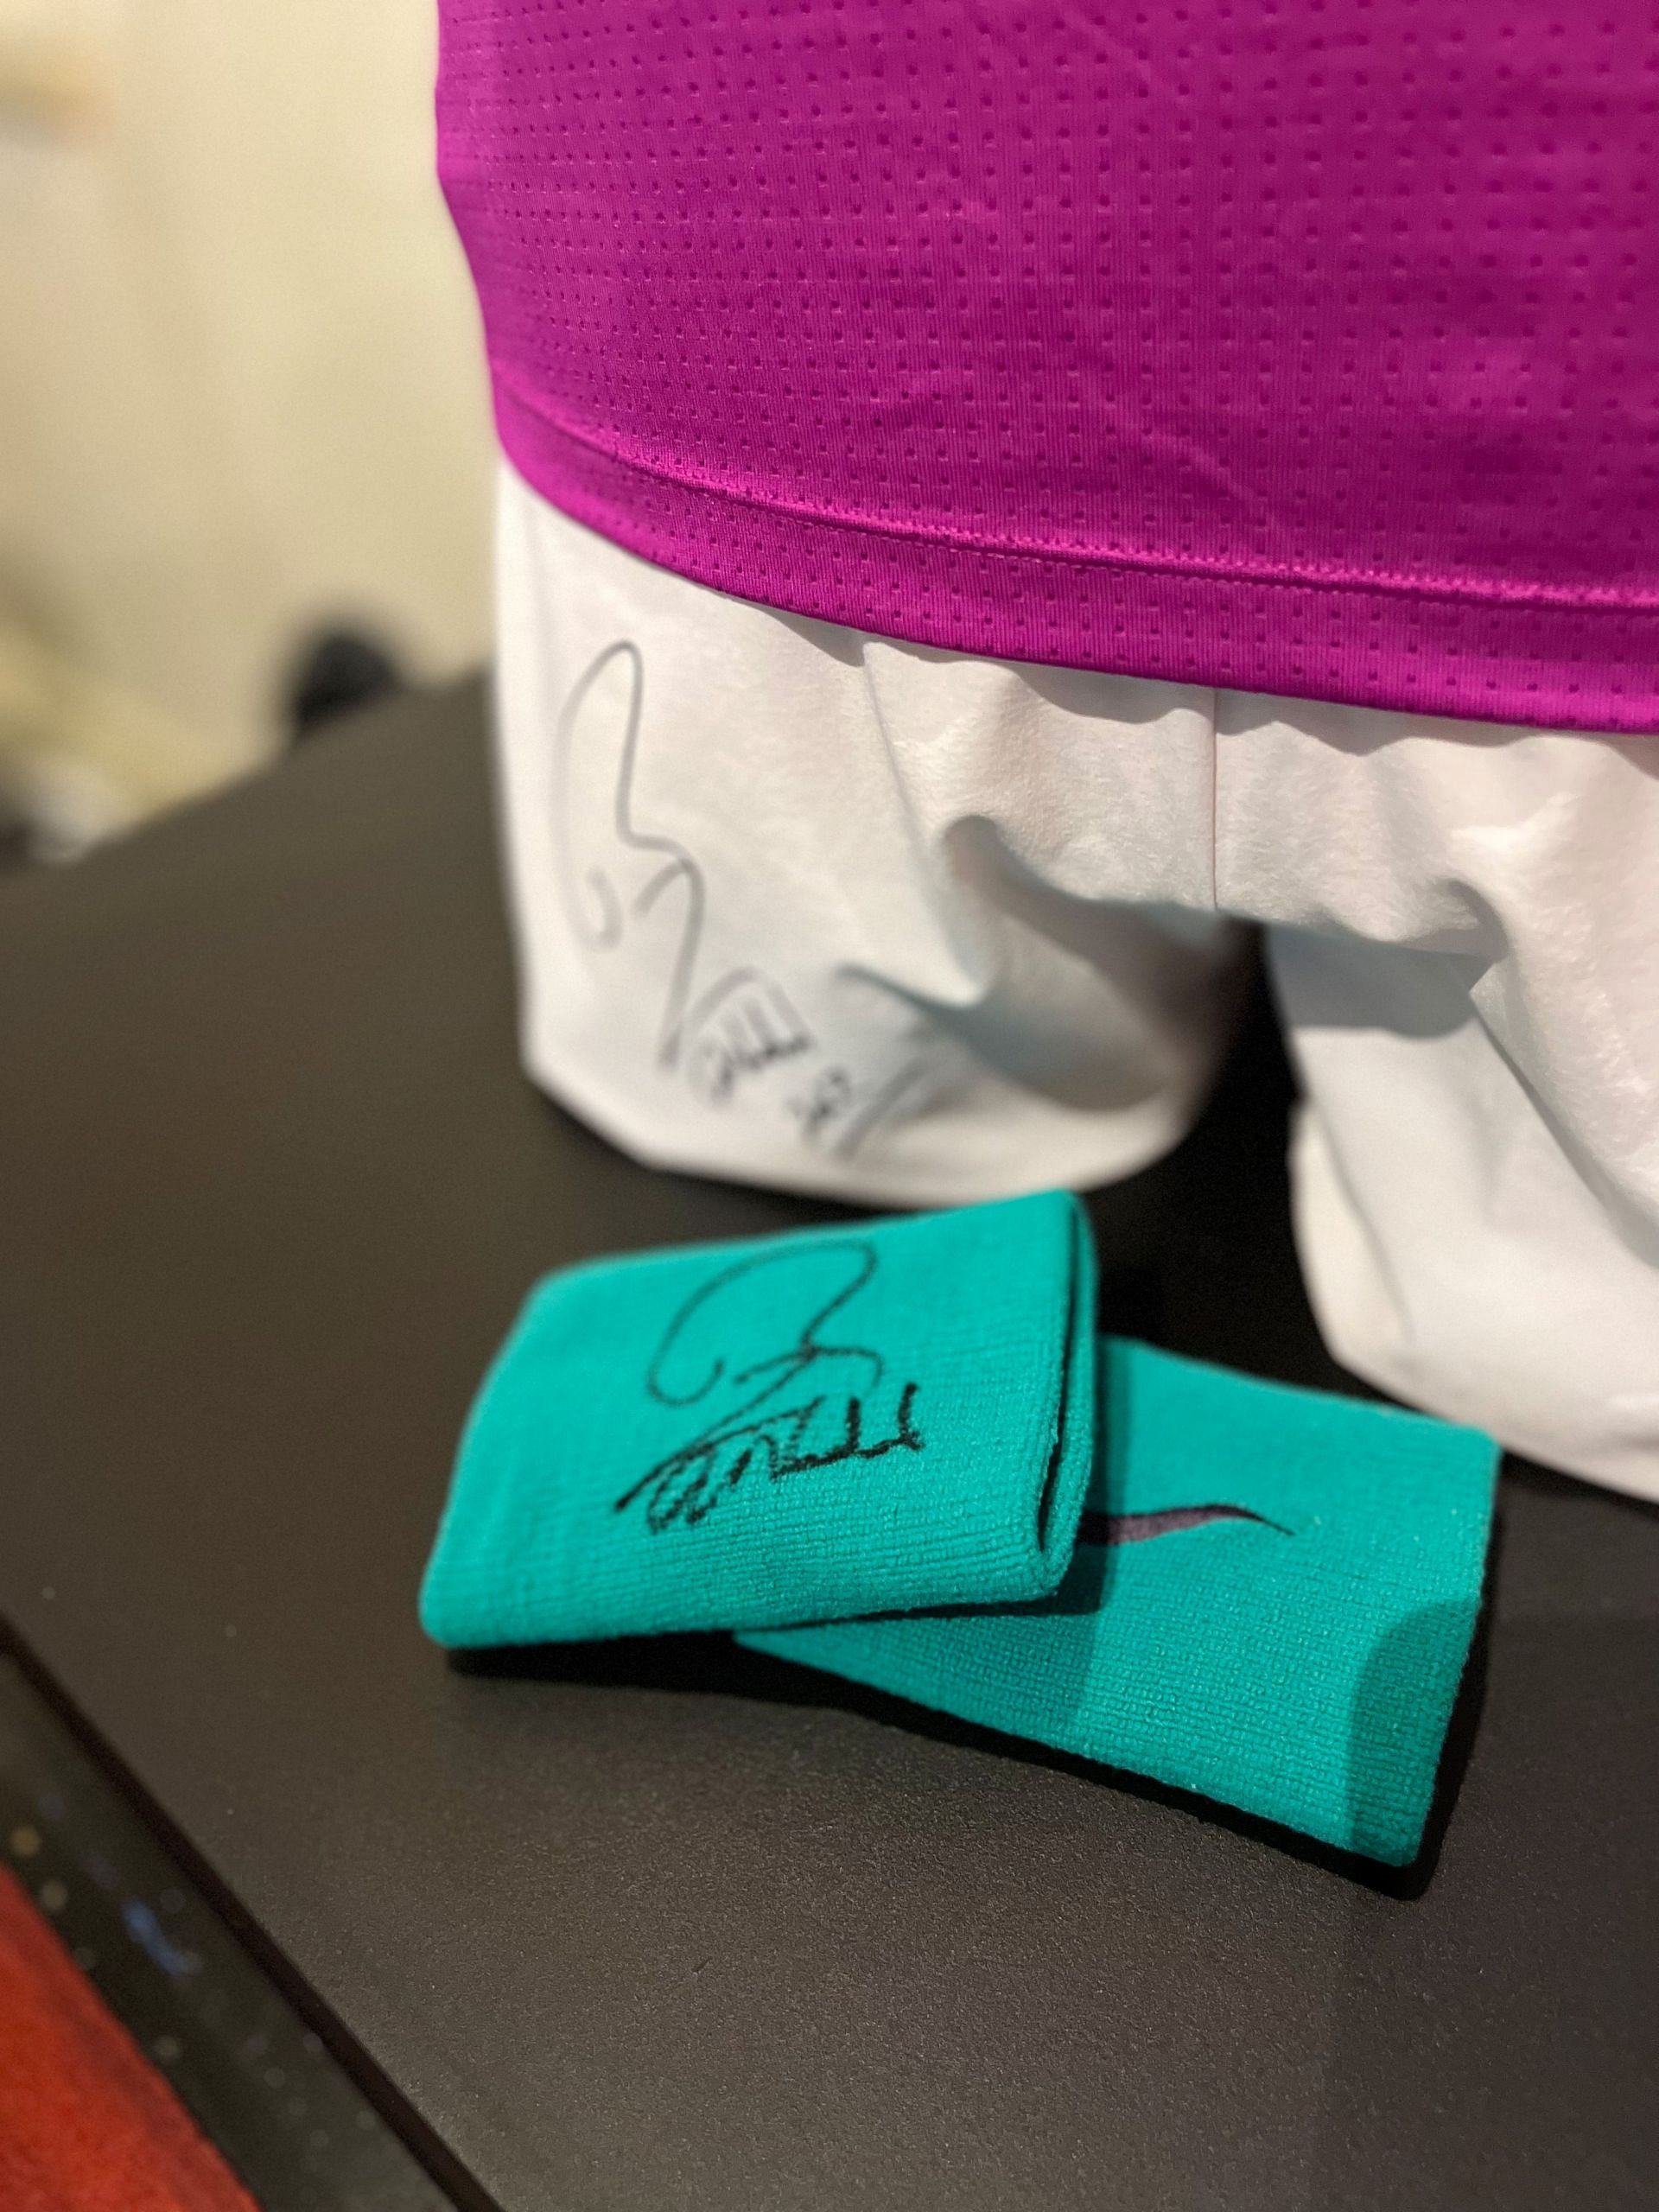 The 21-time Major champion&#039;s shorts and wristbands are also part of the collection